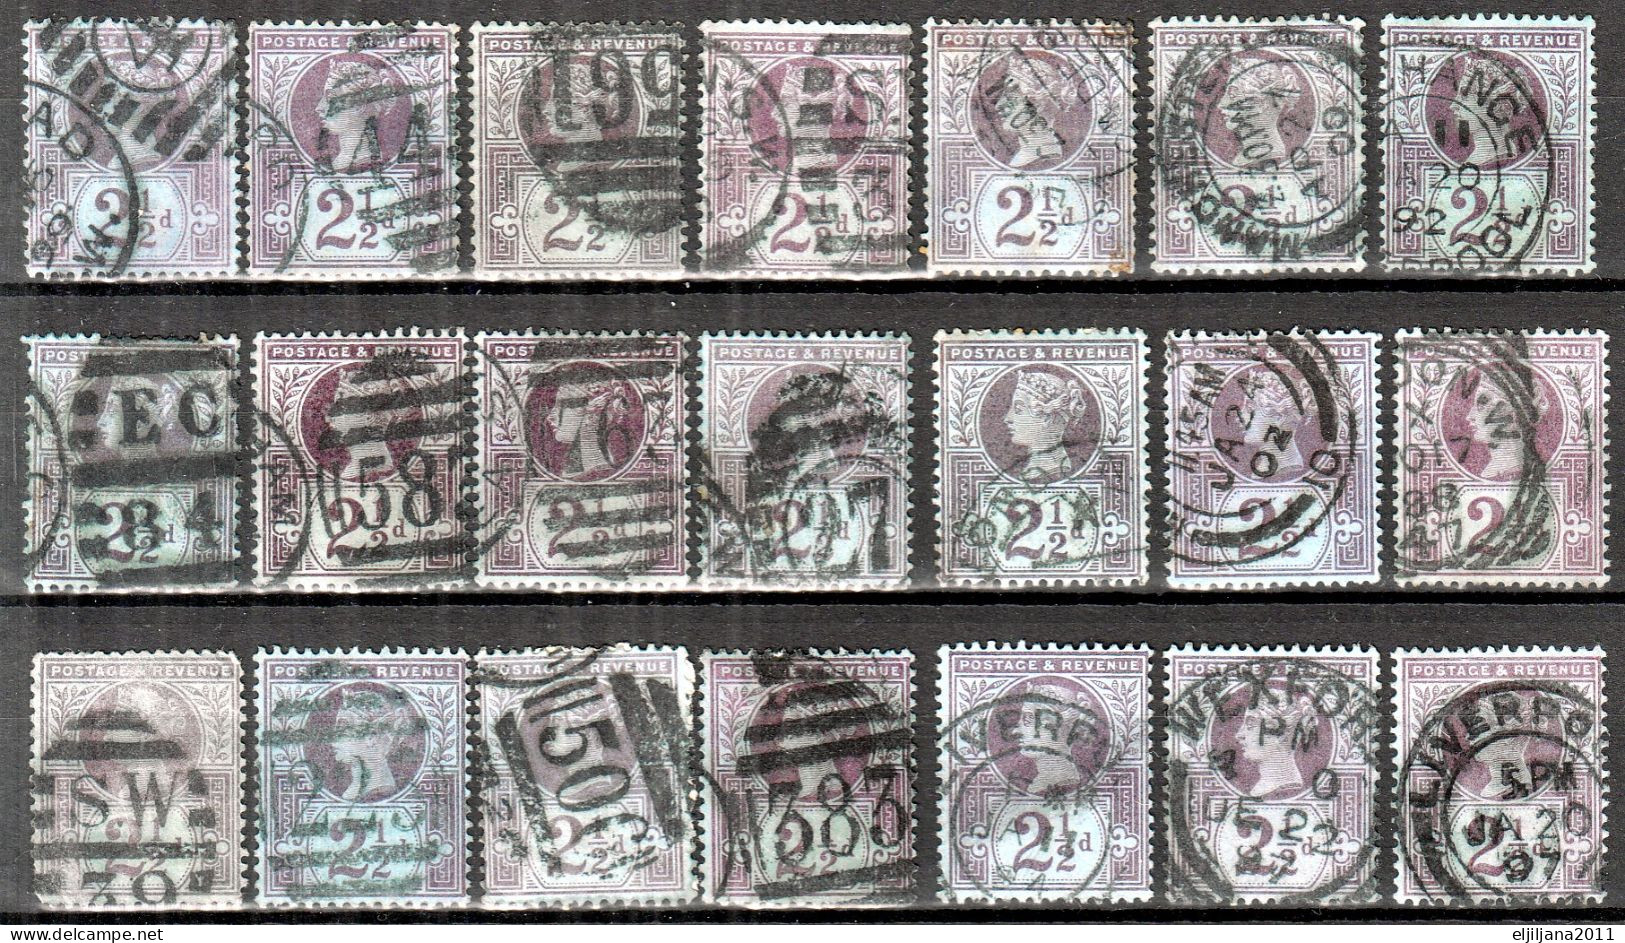 Great Britain GB / UK 1887 ⁕ QV Jubilee Issue 50th 2½d Mi.89 / SG 201 ⁕ 21v Used / Shades / Nice Postmark - Usati